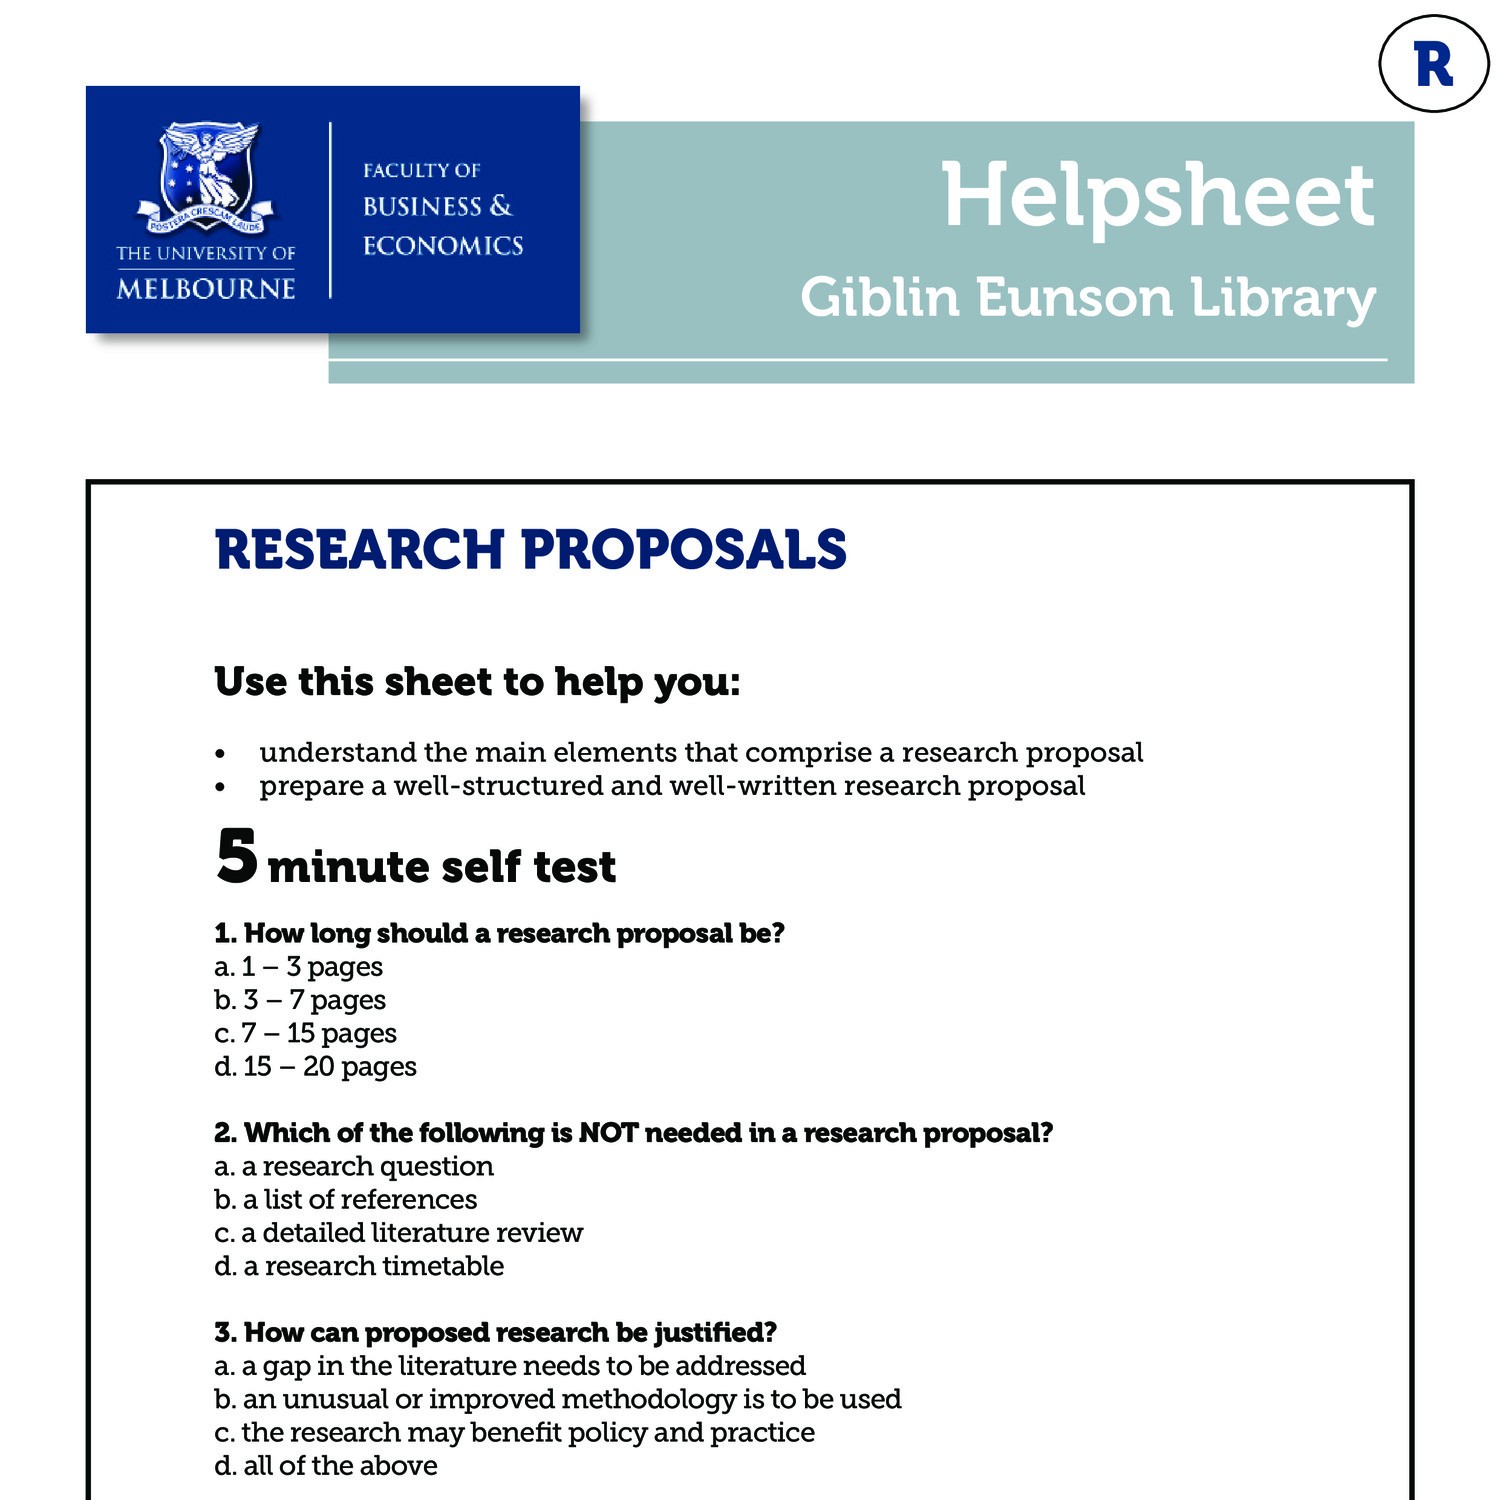 identify any two (2) elements of a good research proposal